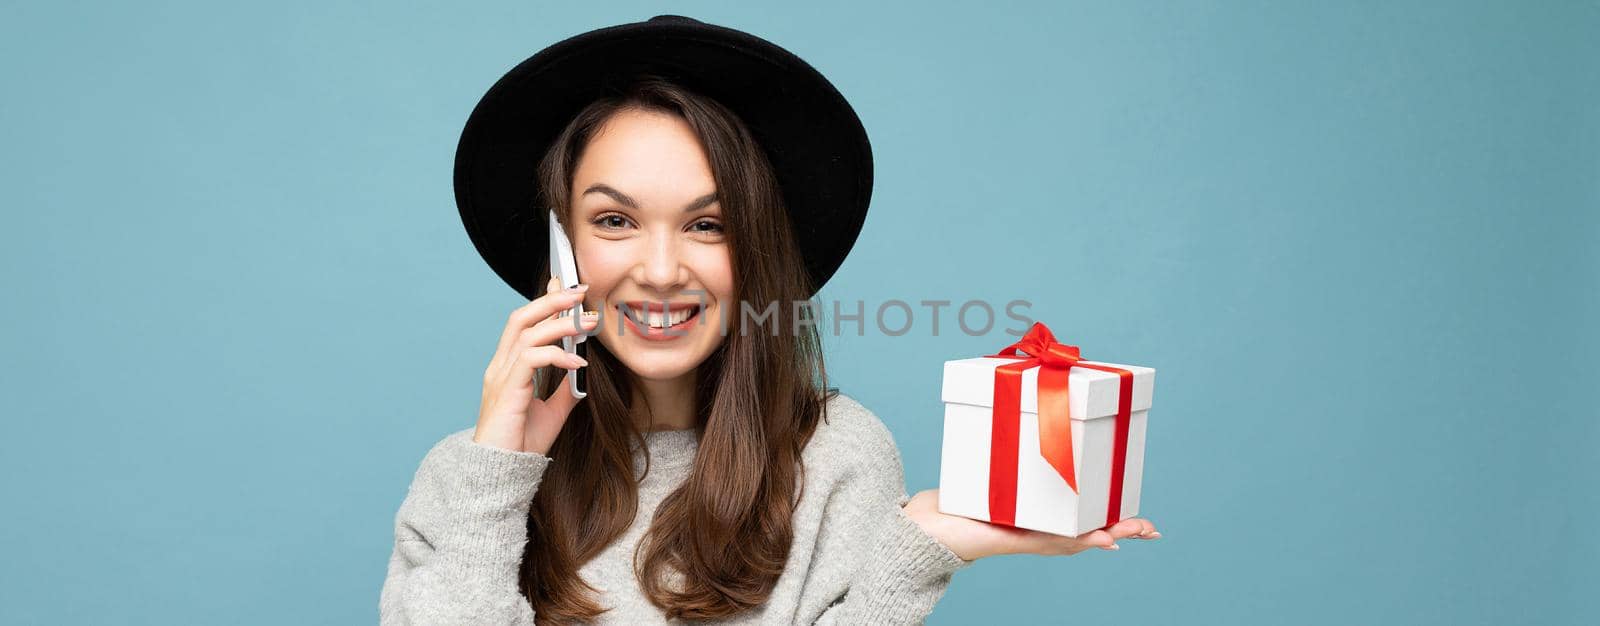 Shot of pretty smiling positive young brunette woman isolated over blue background wall wearing stylish black hat and grey sweater holding gift box talking on smartphone and looking at camera.